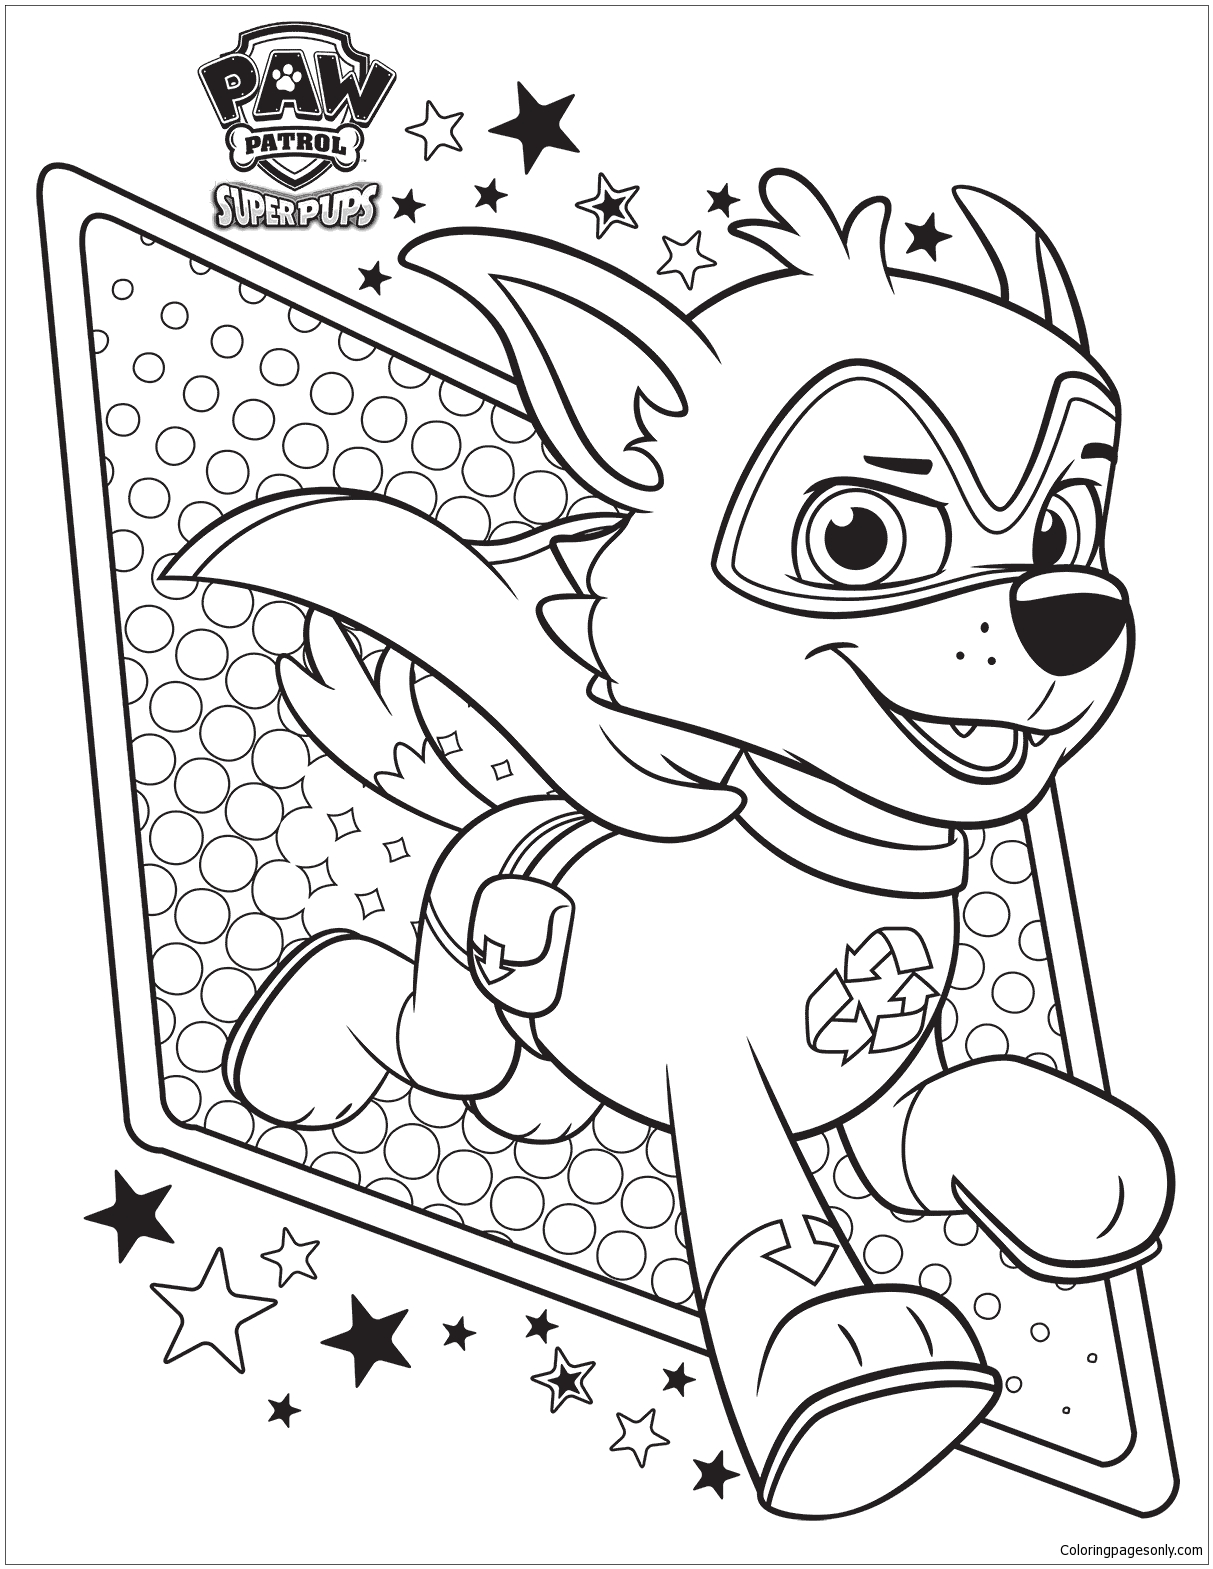 Paw Patrol Super Pups 2 Coloring Page - Free Coloring ...